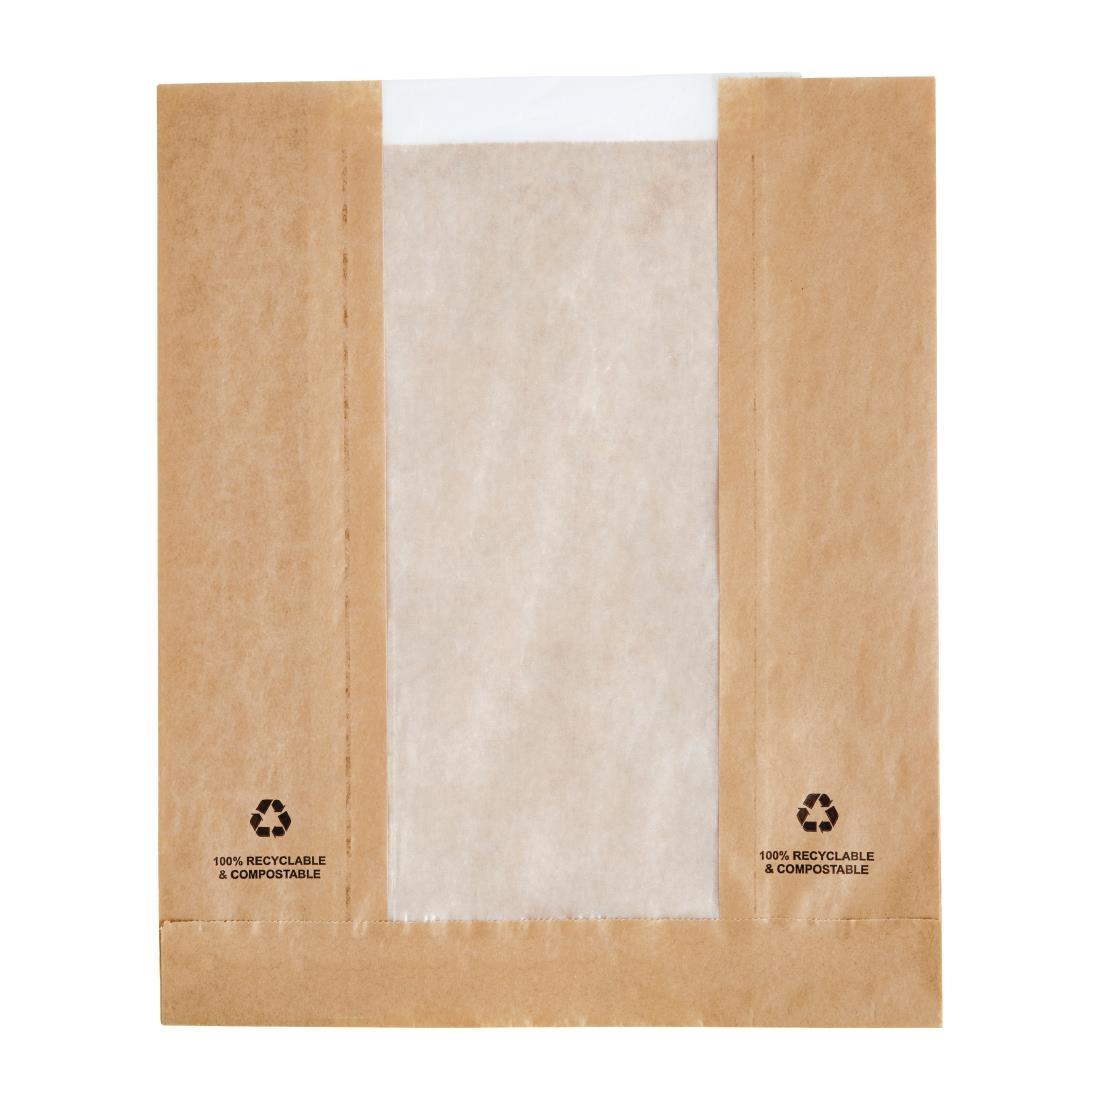 Fiesta Compostable Food Bags with Glassine Windows (Pack of 1000) - DC875  - 1